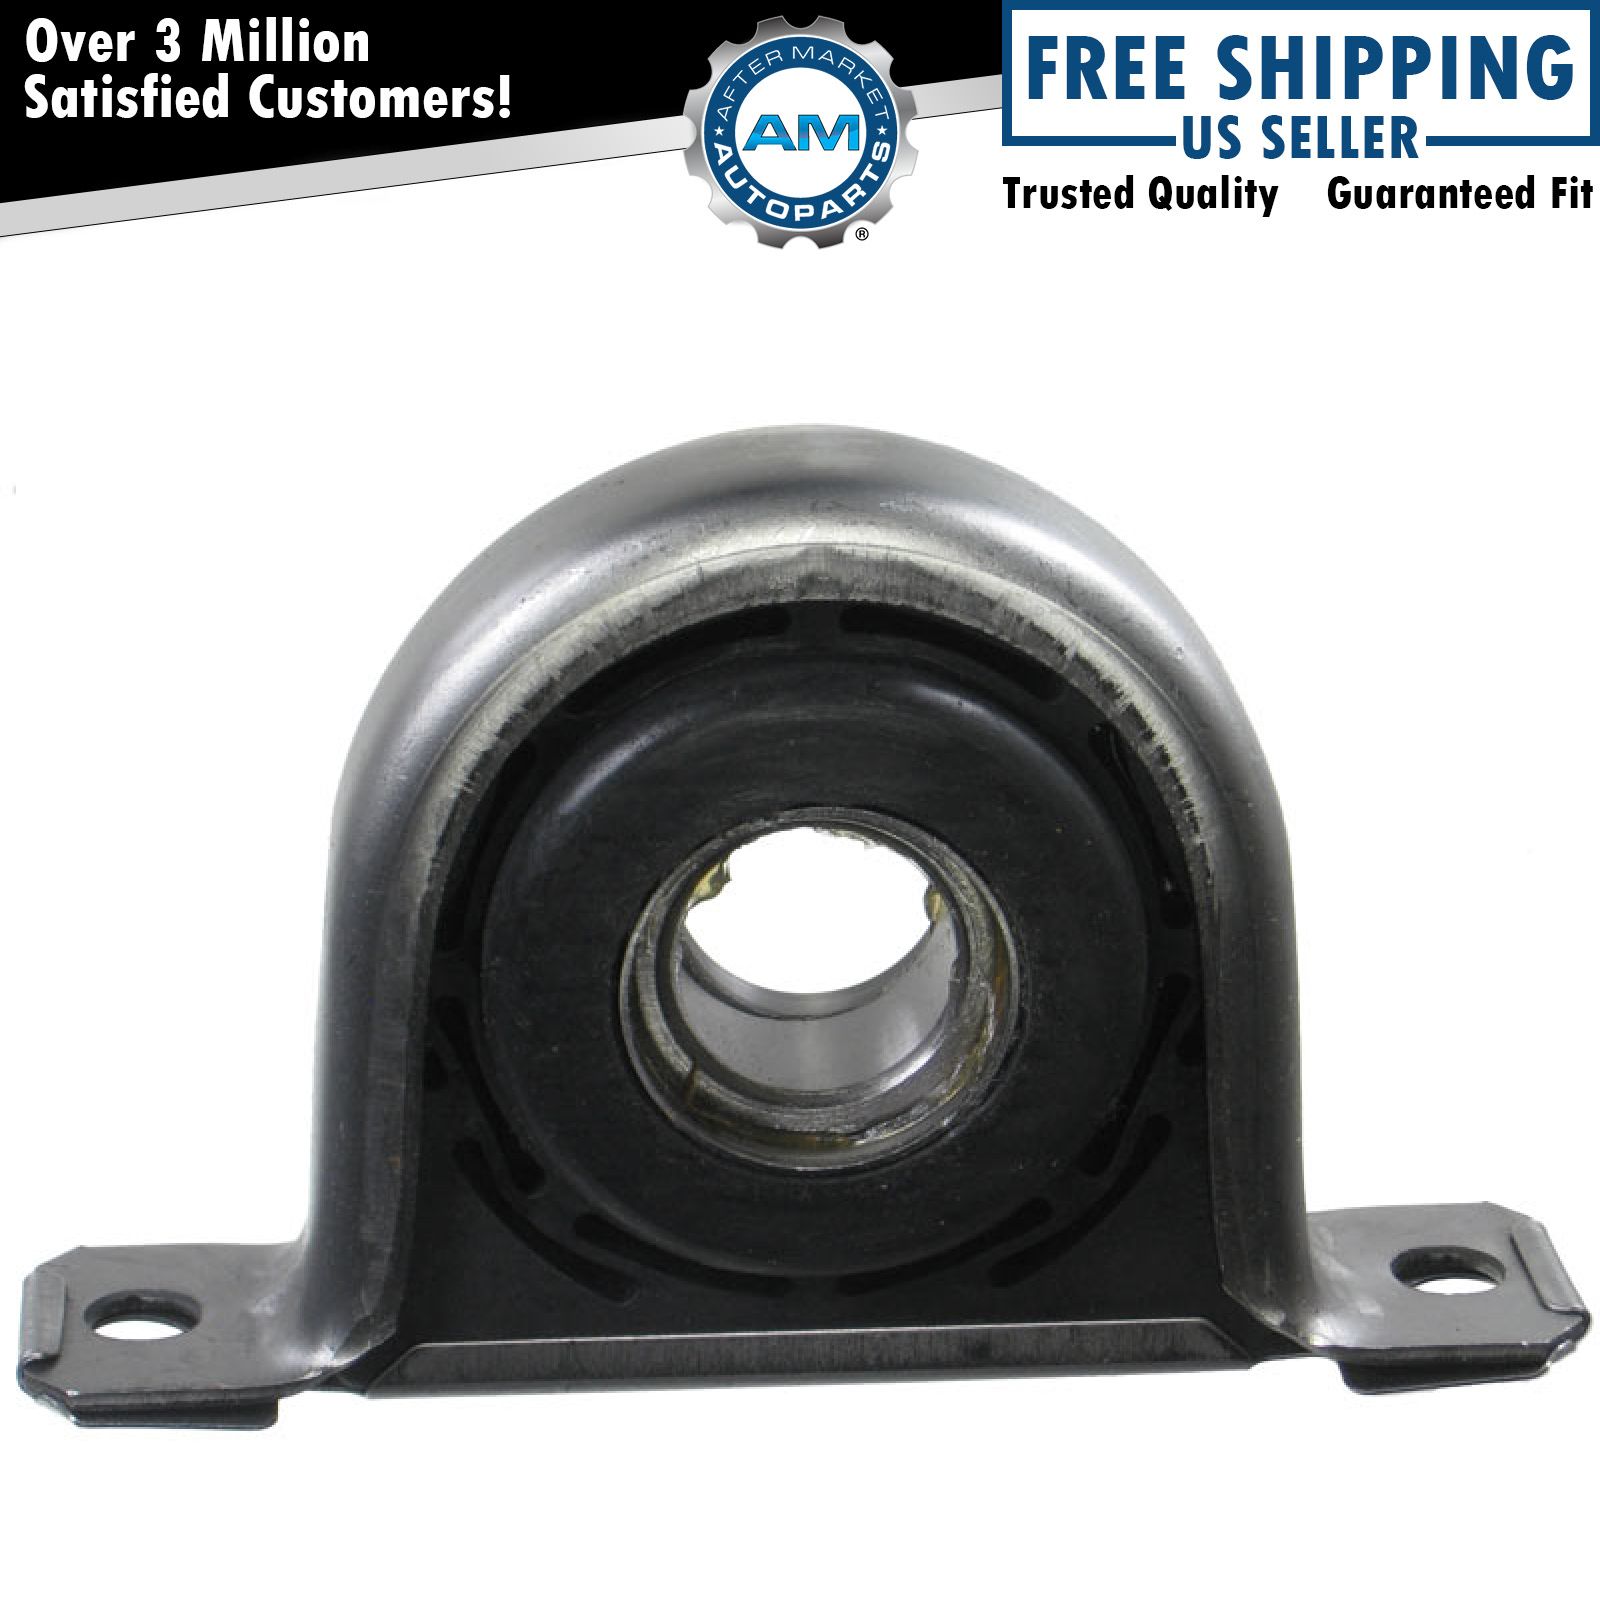 Drive Shaft Center Support Bearing Bracket 35mm ID for Chevy Dodge Ford GMC